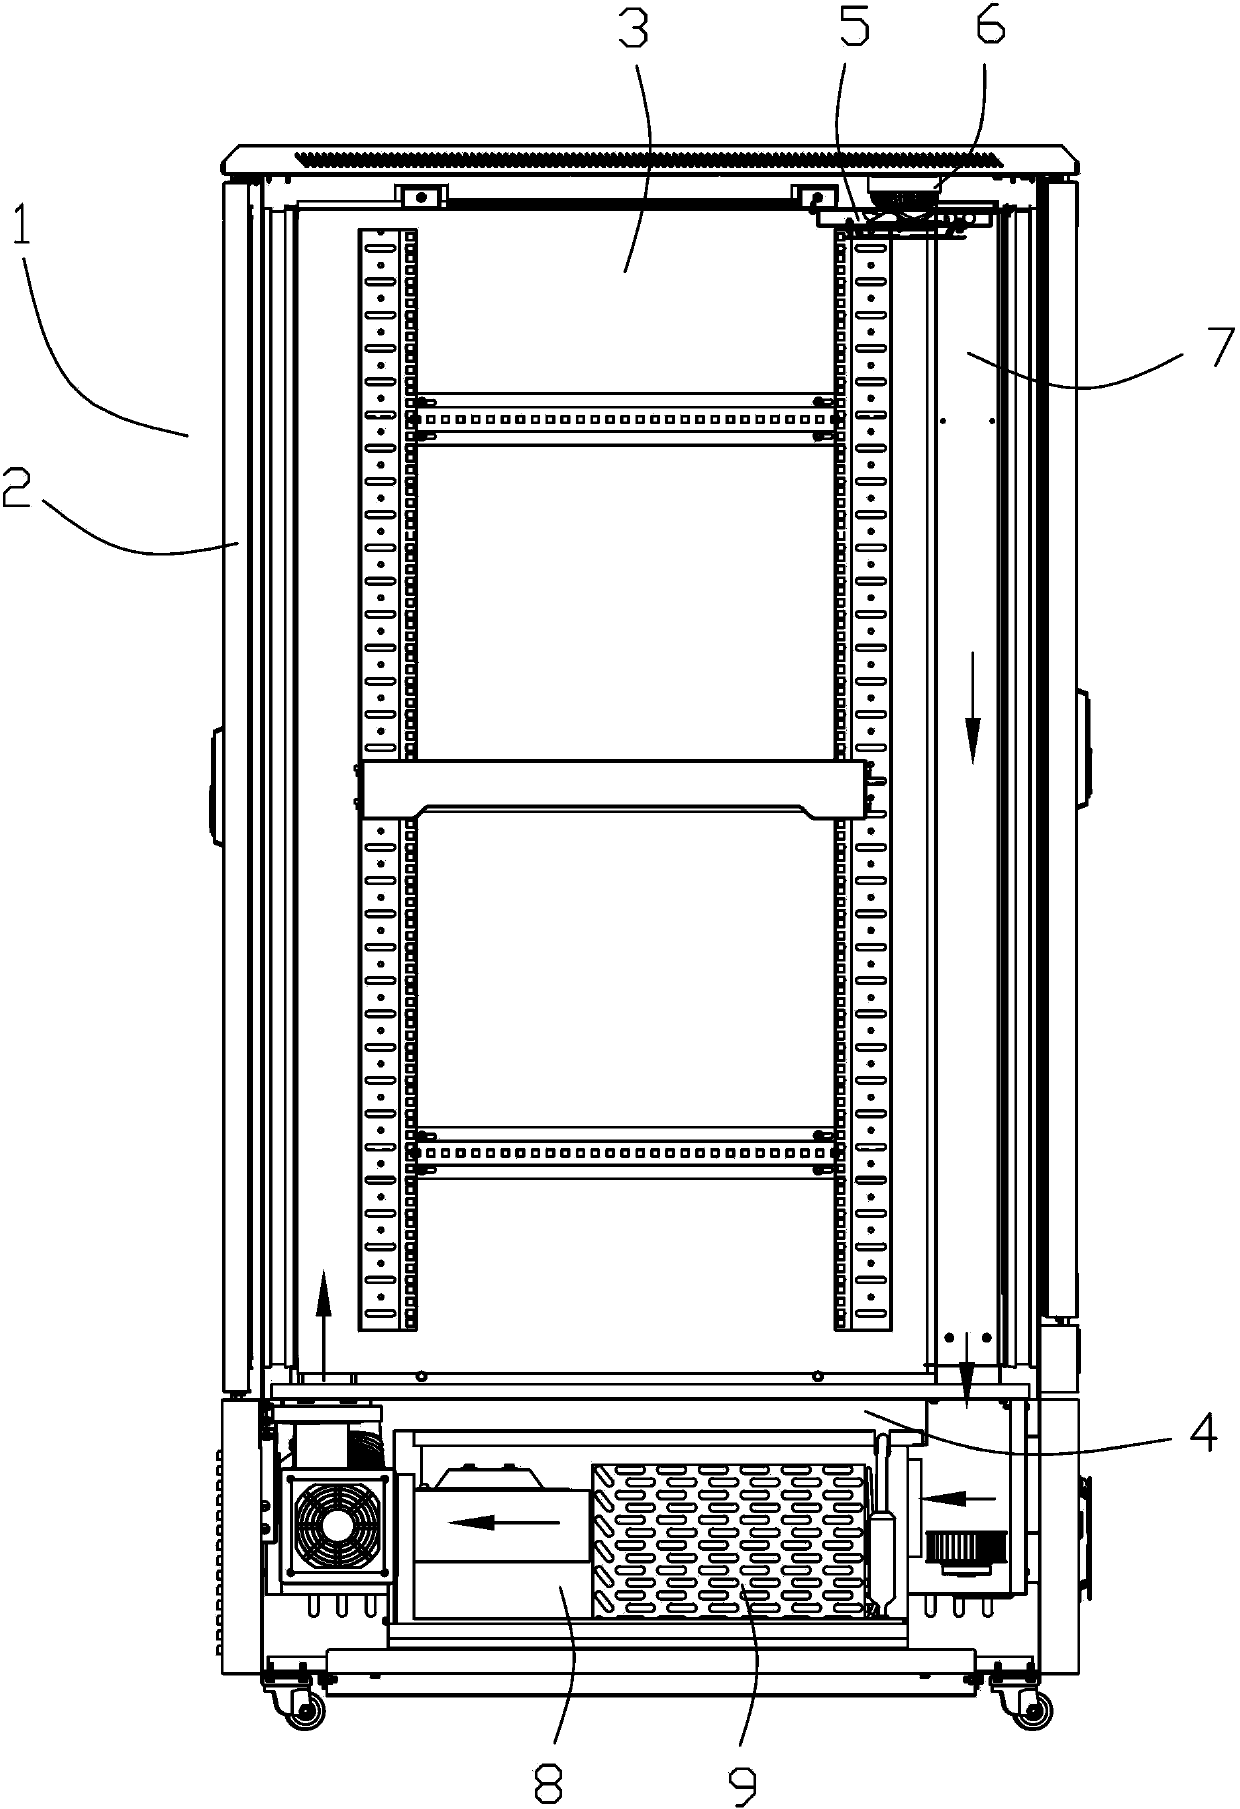 High-precision high-safety modularly-designed energy-saving thermostatic server cabinet